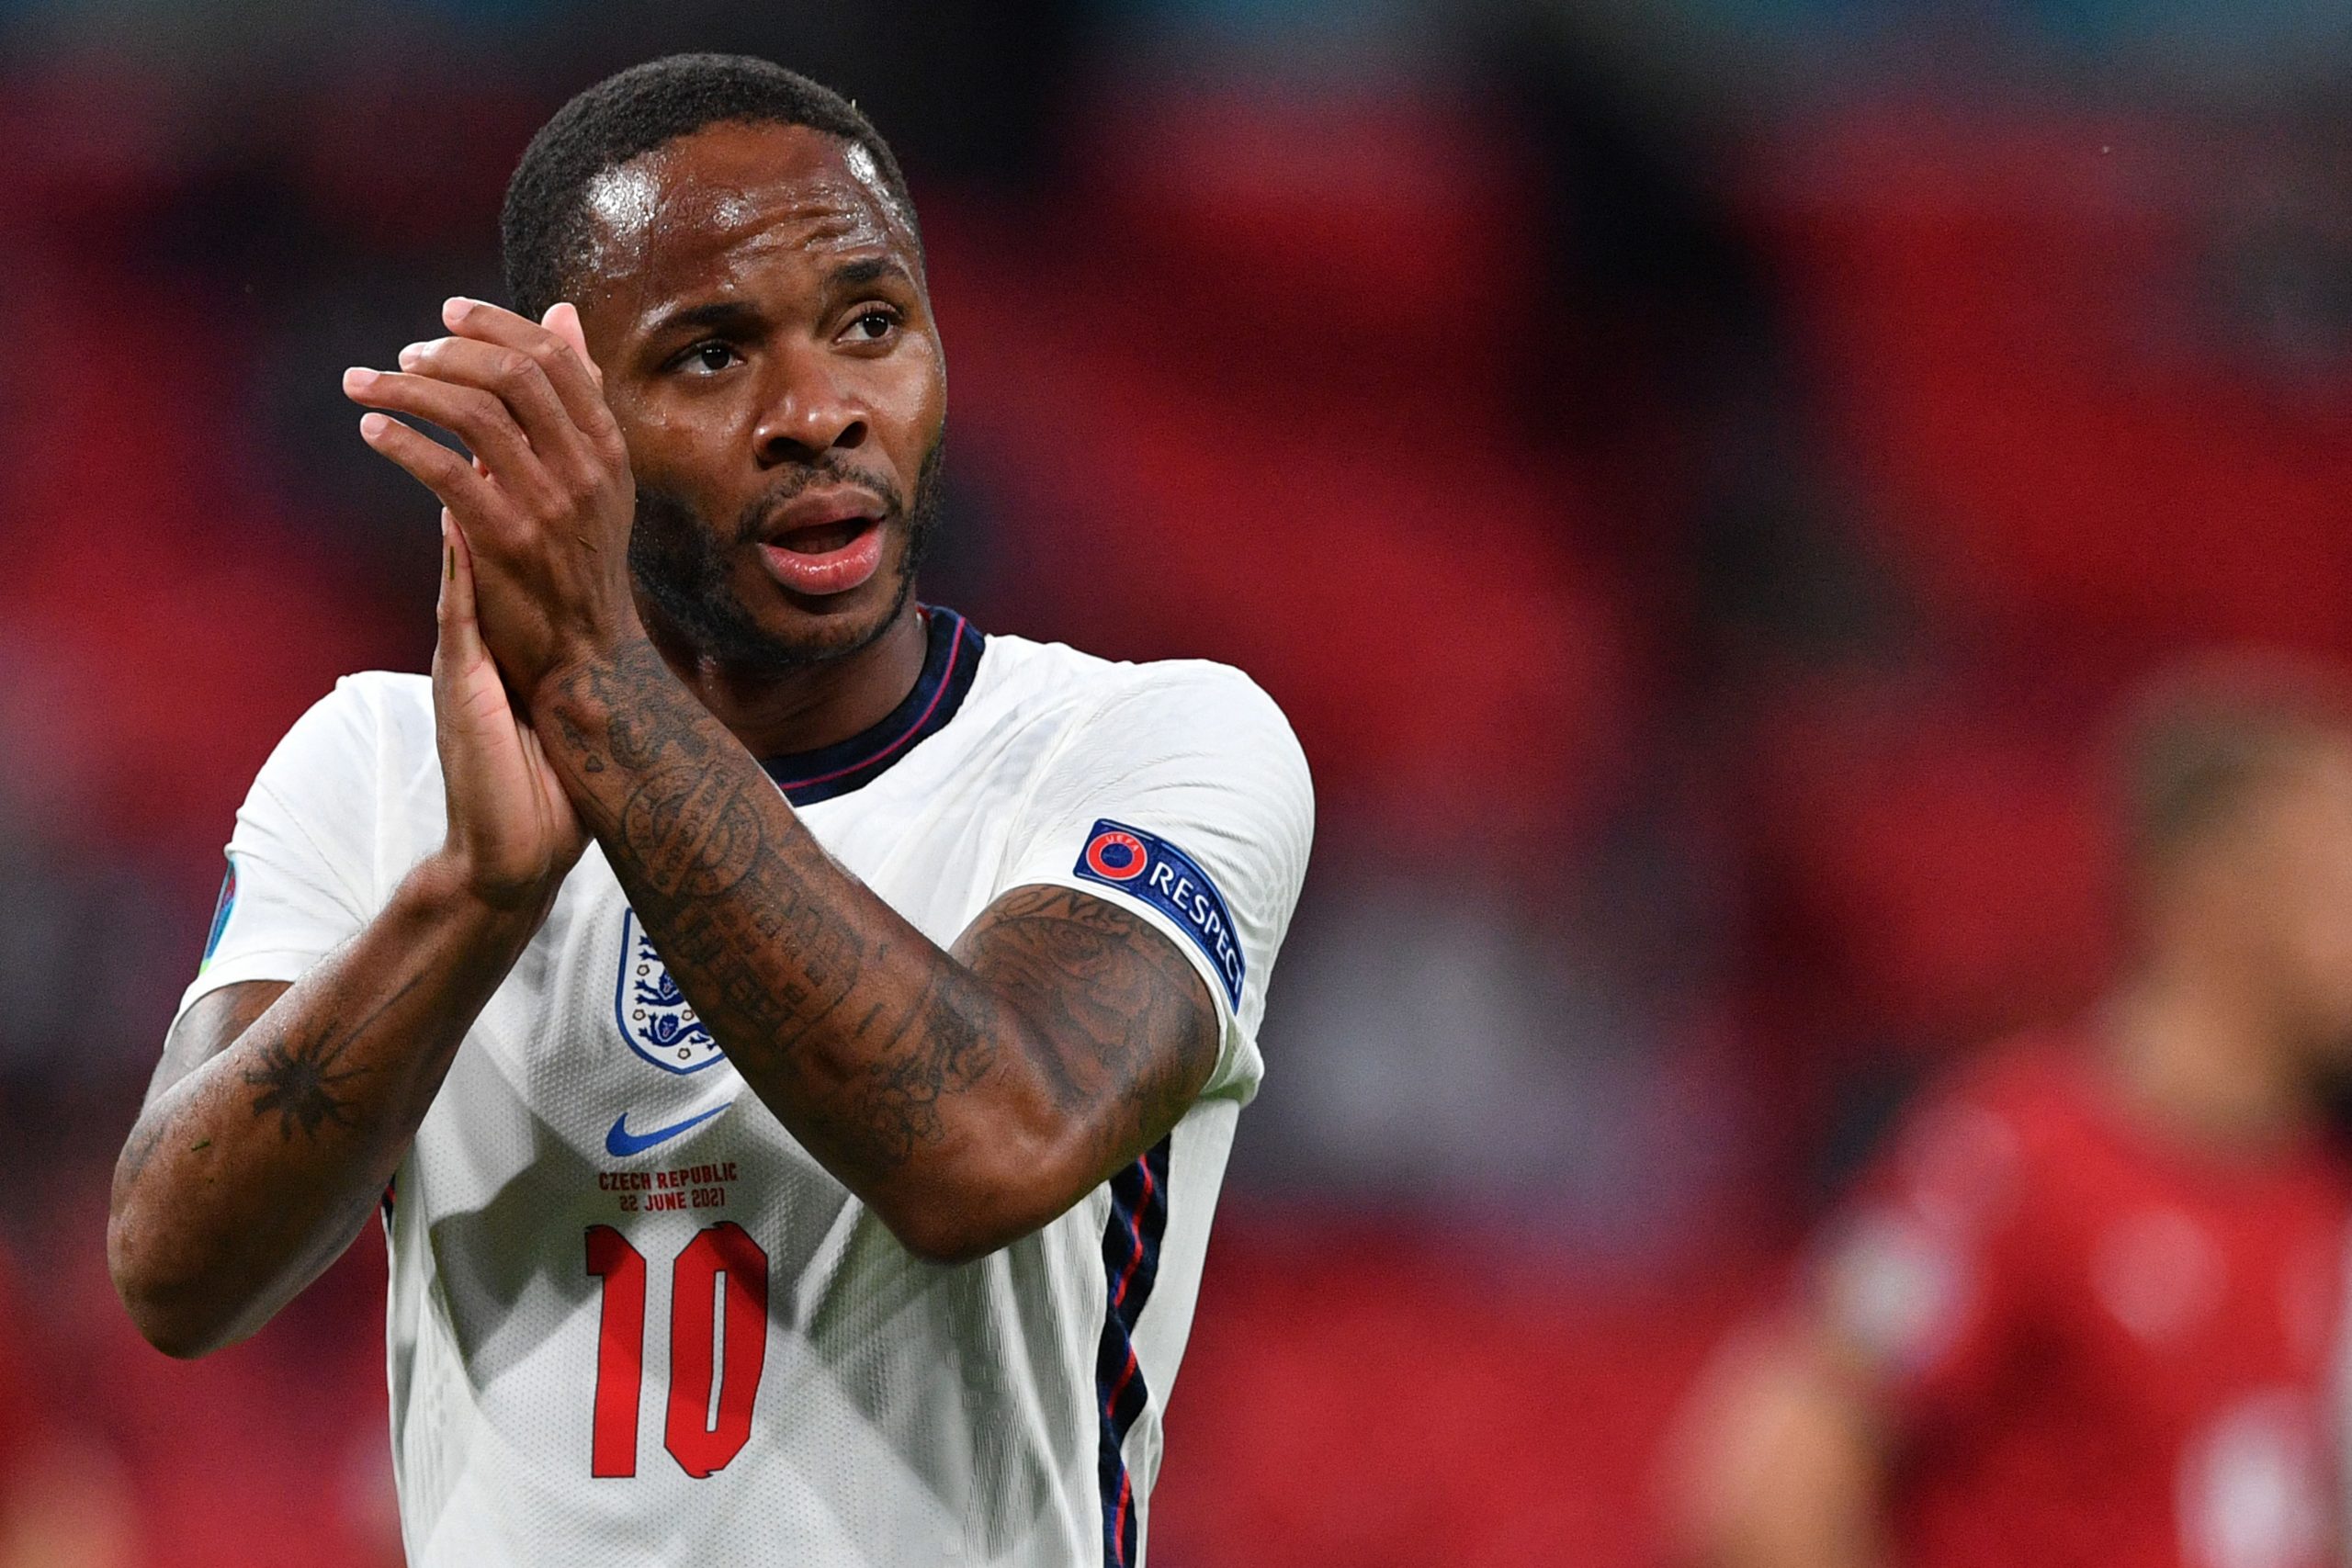 Euro 2020: Raheem Sterling gets England over the line against Czech Republic